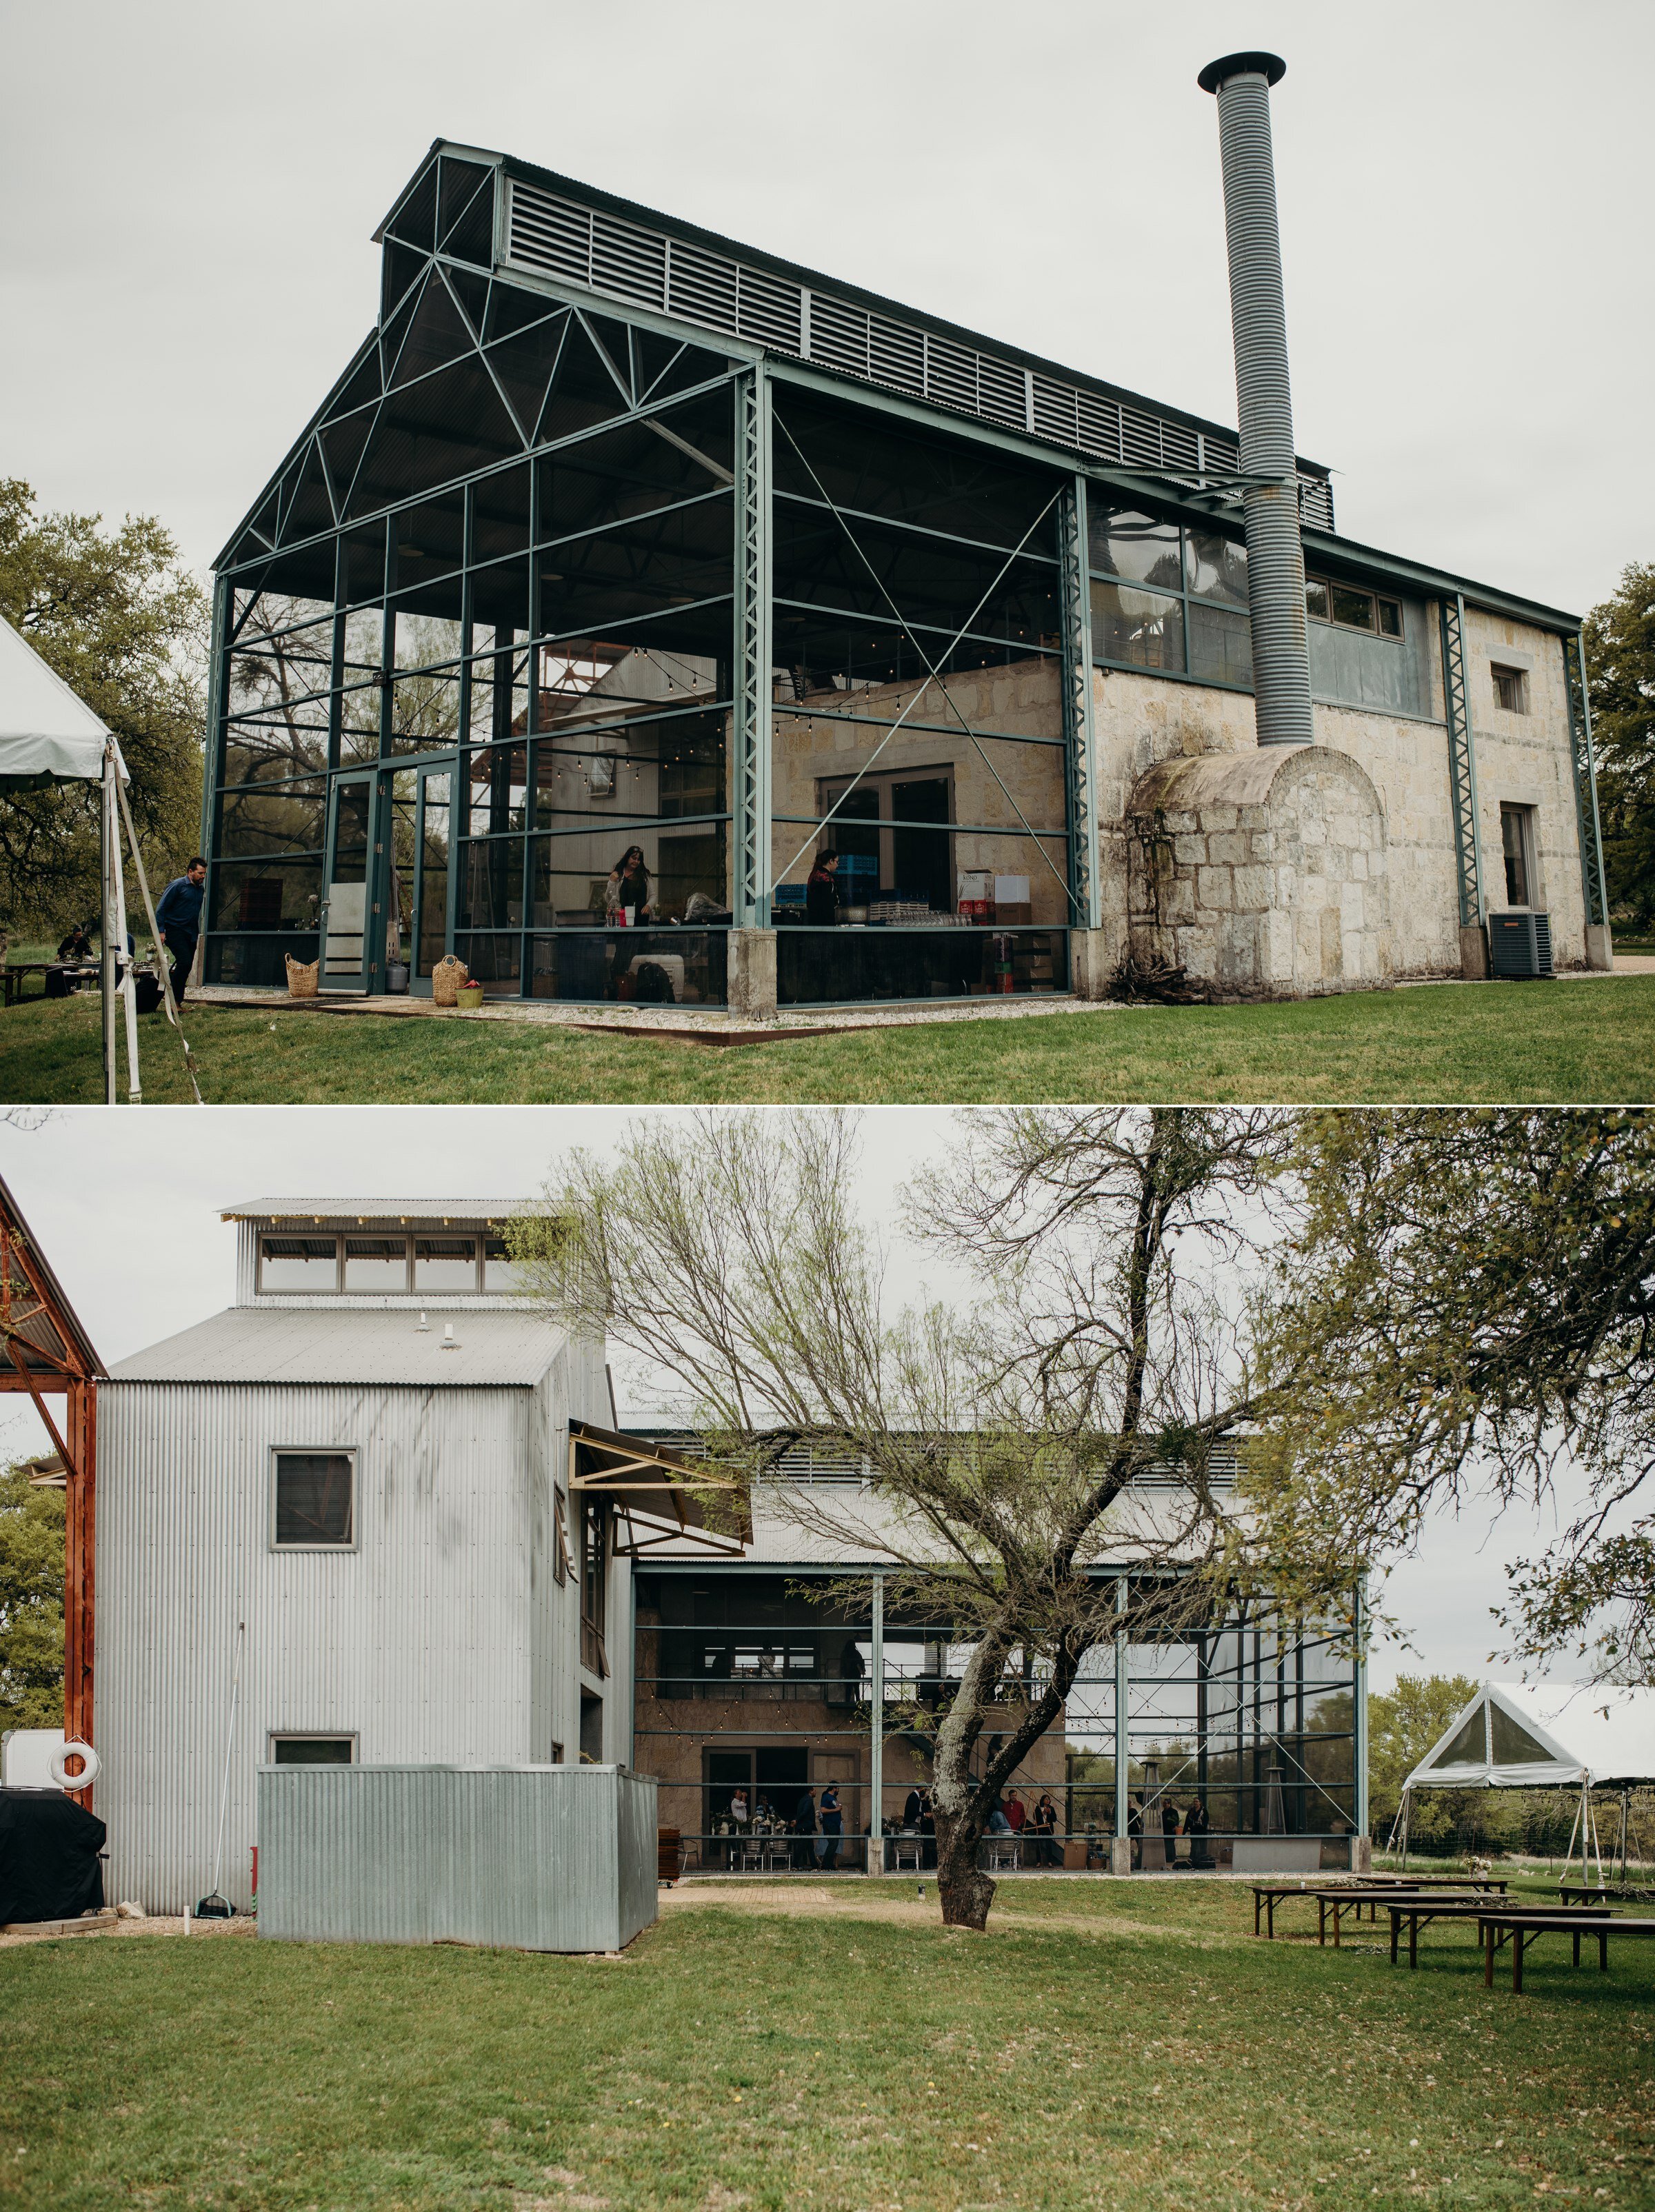  the plant at kyle wedding venue in austin texas 